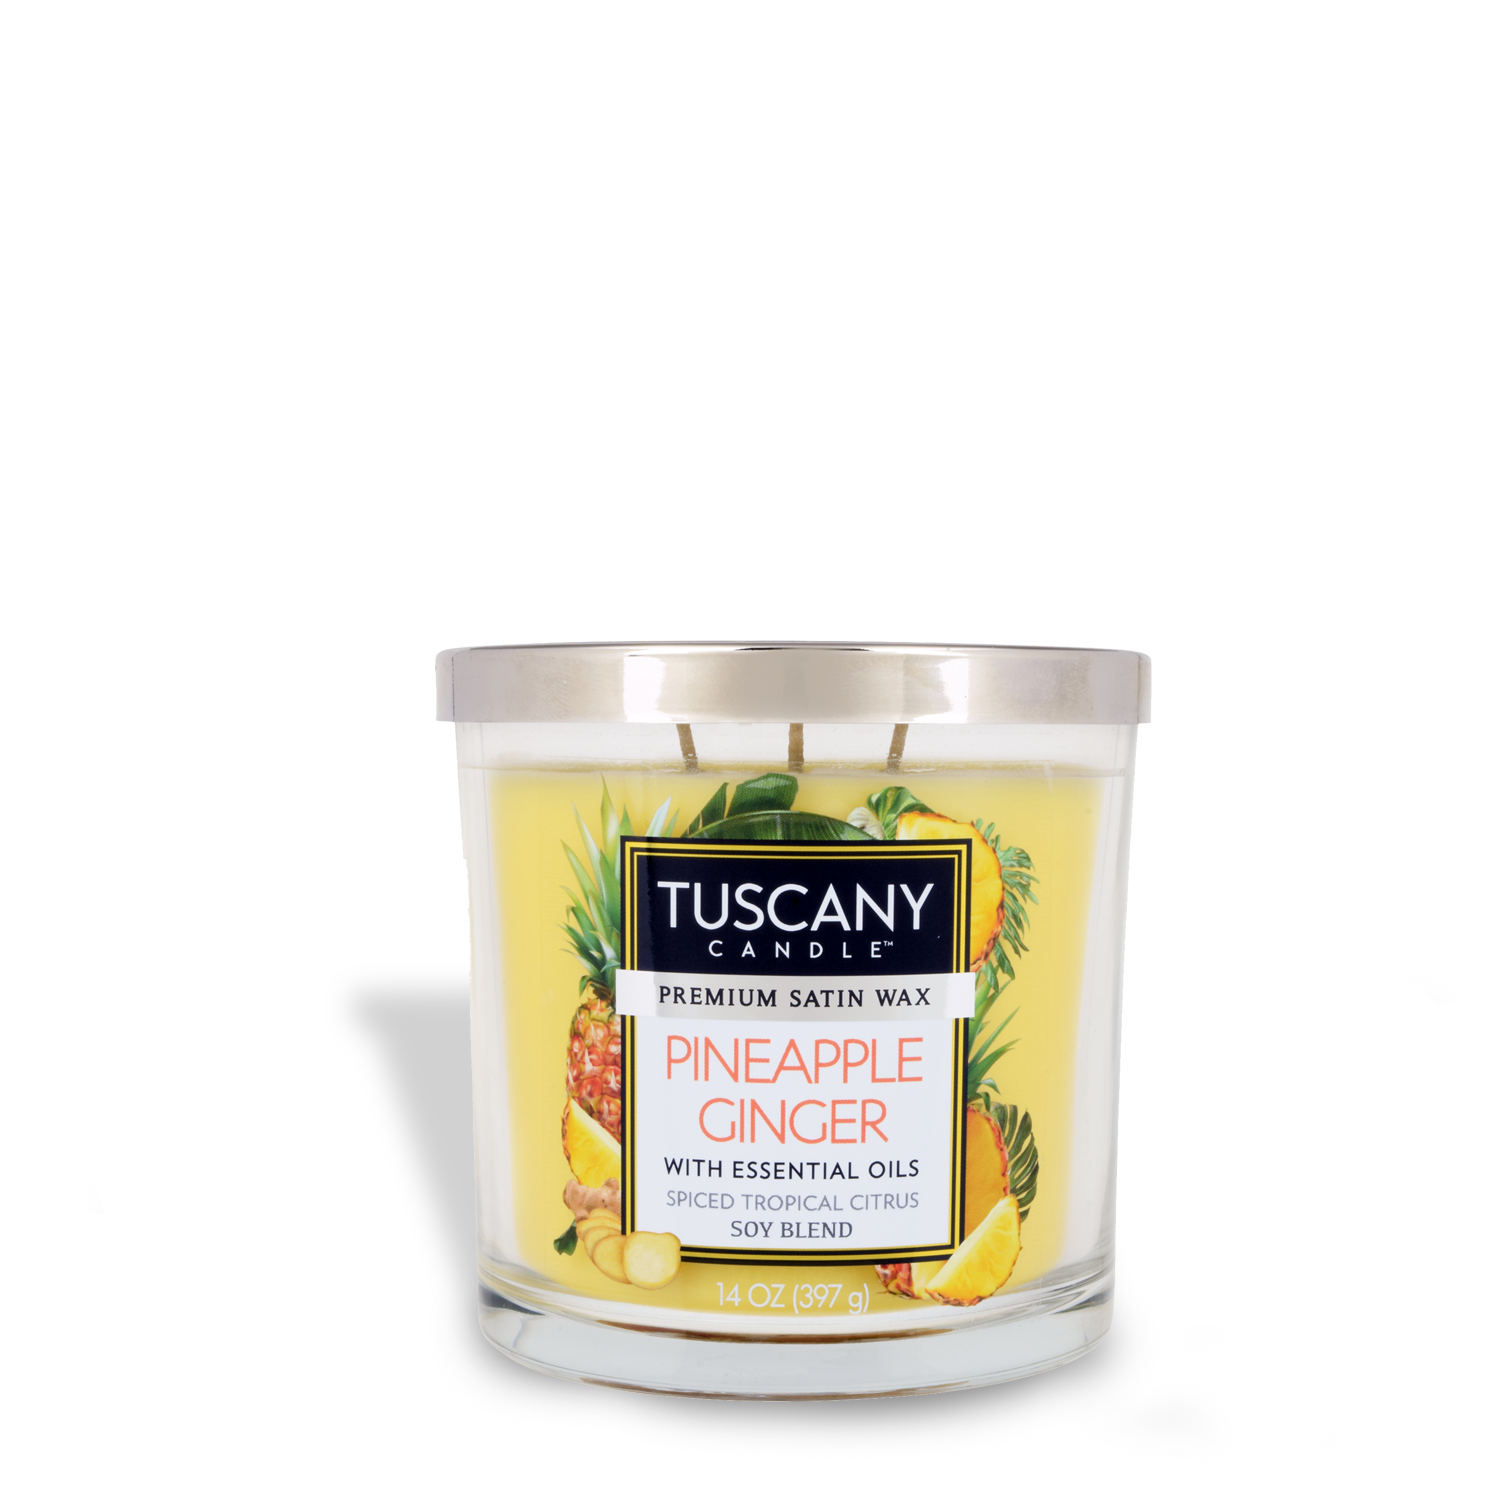 A delightful Tuscany Candle Pineapple Ginger Long-Lasting Scented Jar Candle (14 oz) infused with essential oils.